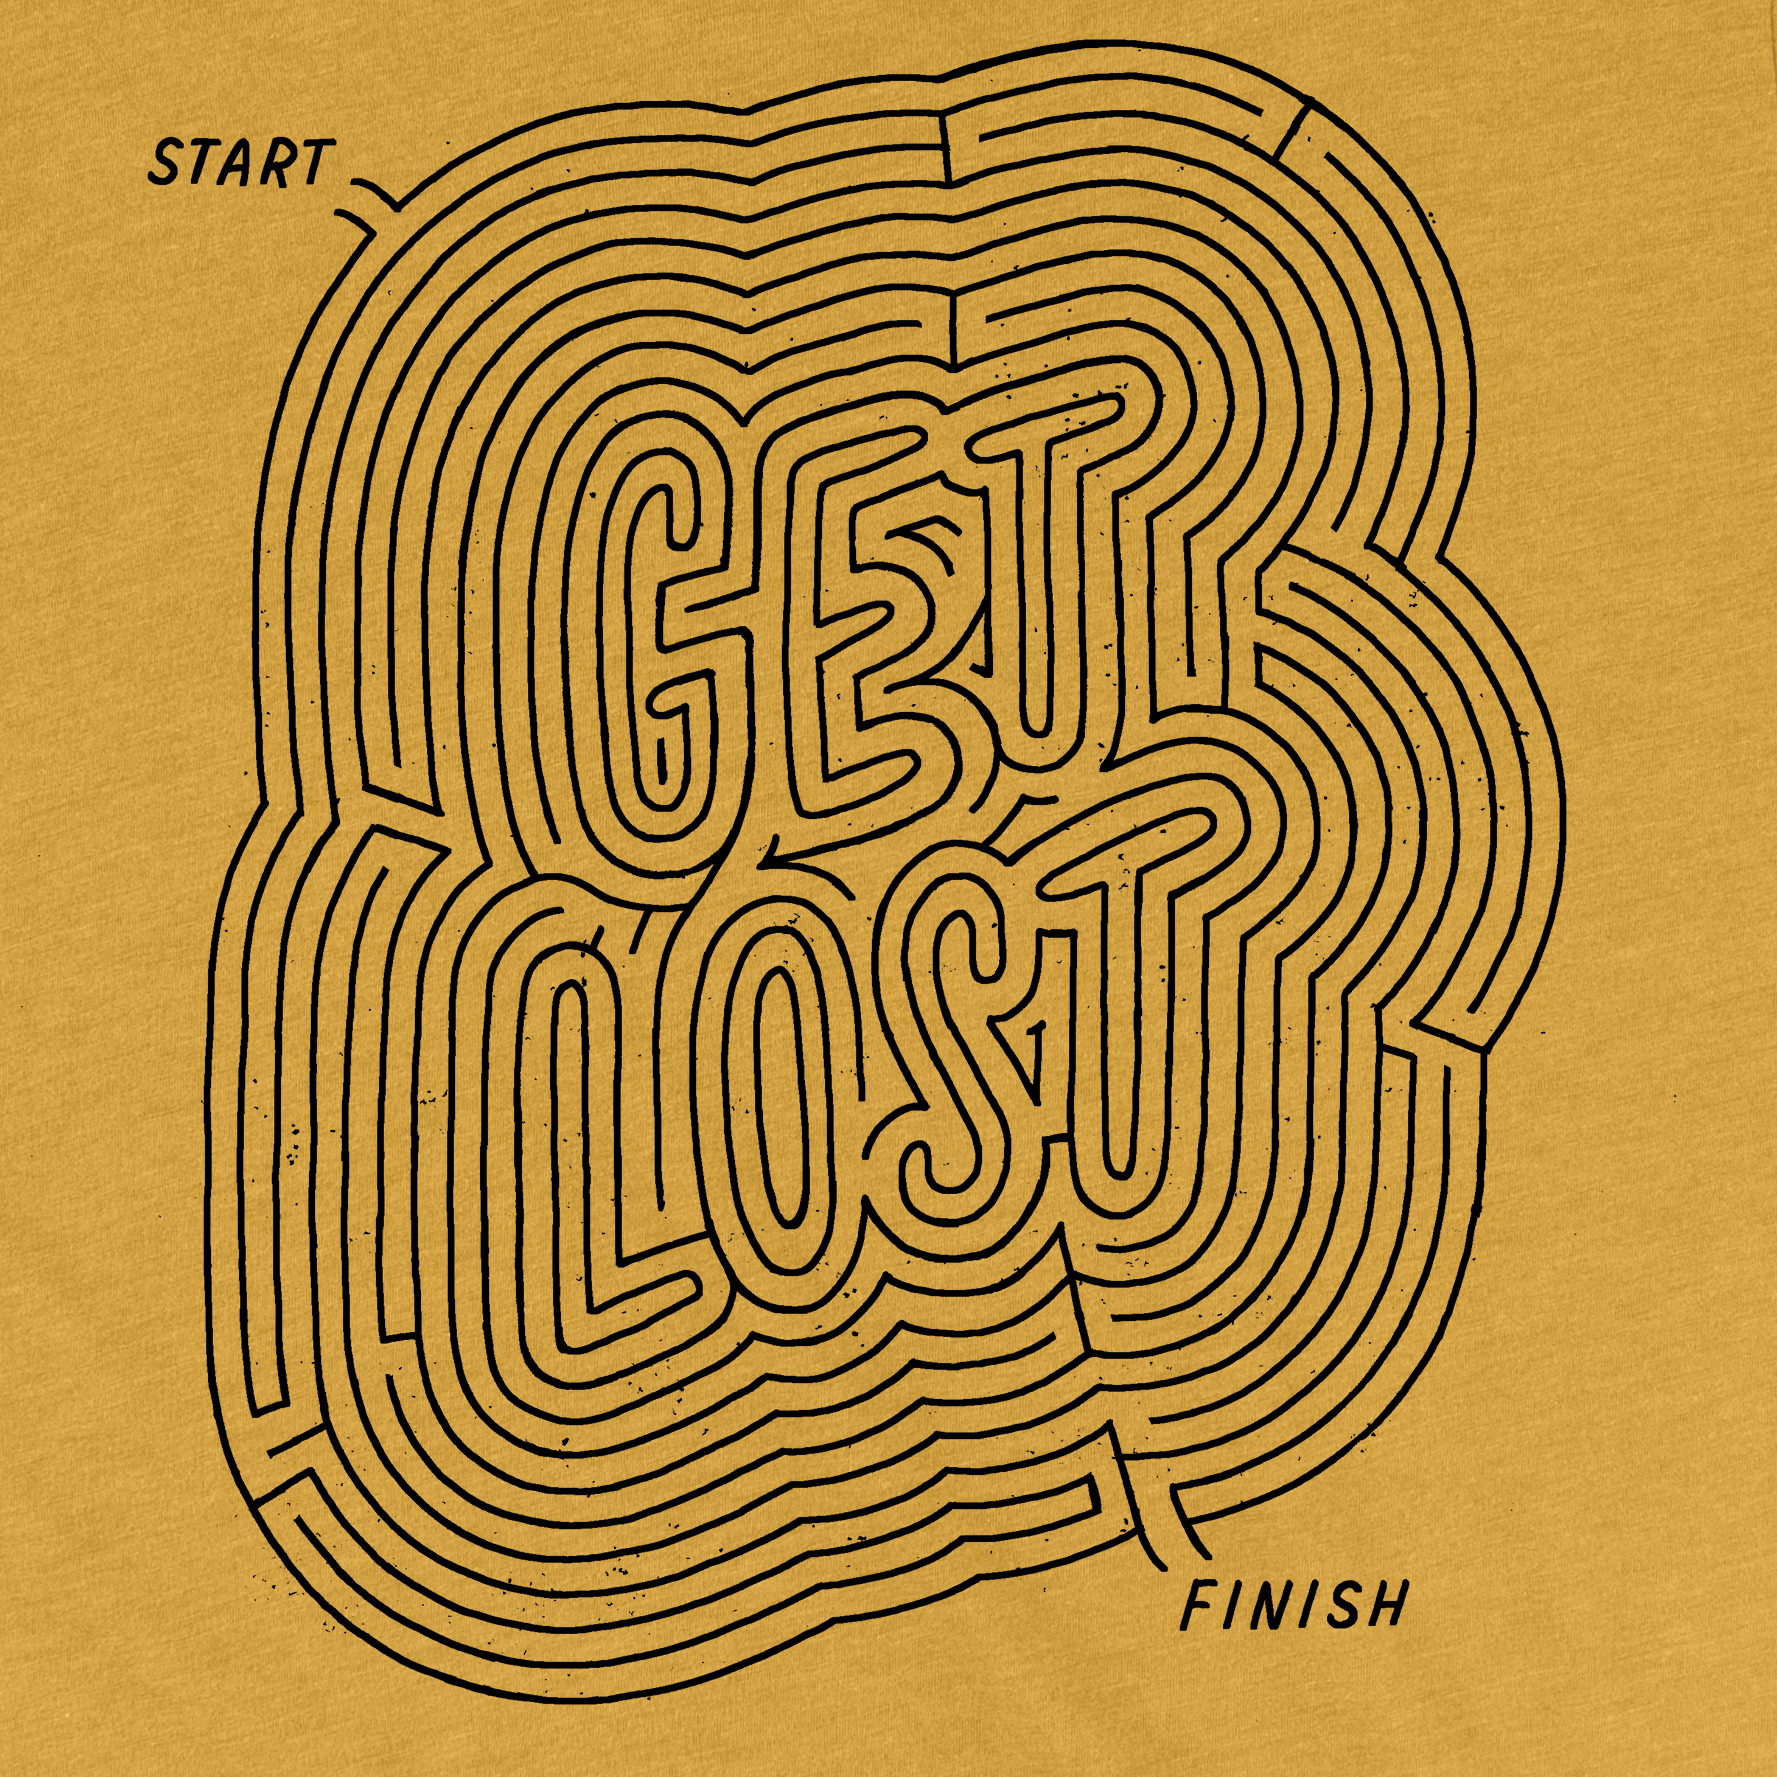 Detail of super soft graphic mustard yellow mens/womens tshirt of the words Get Lost made up of a maze with a start and finish part of the maze. Factory 43 is a design studio that makes art with a PNW vibe that reflects their Midwest/Southern roots. This cotton/polyester tee was printed in Seattle, Washington.